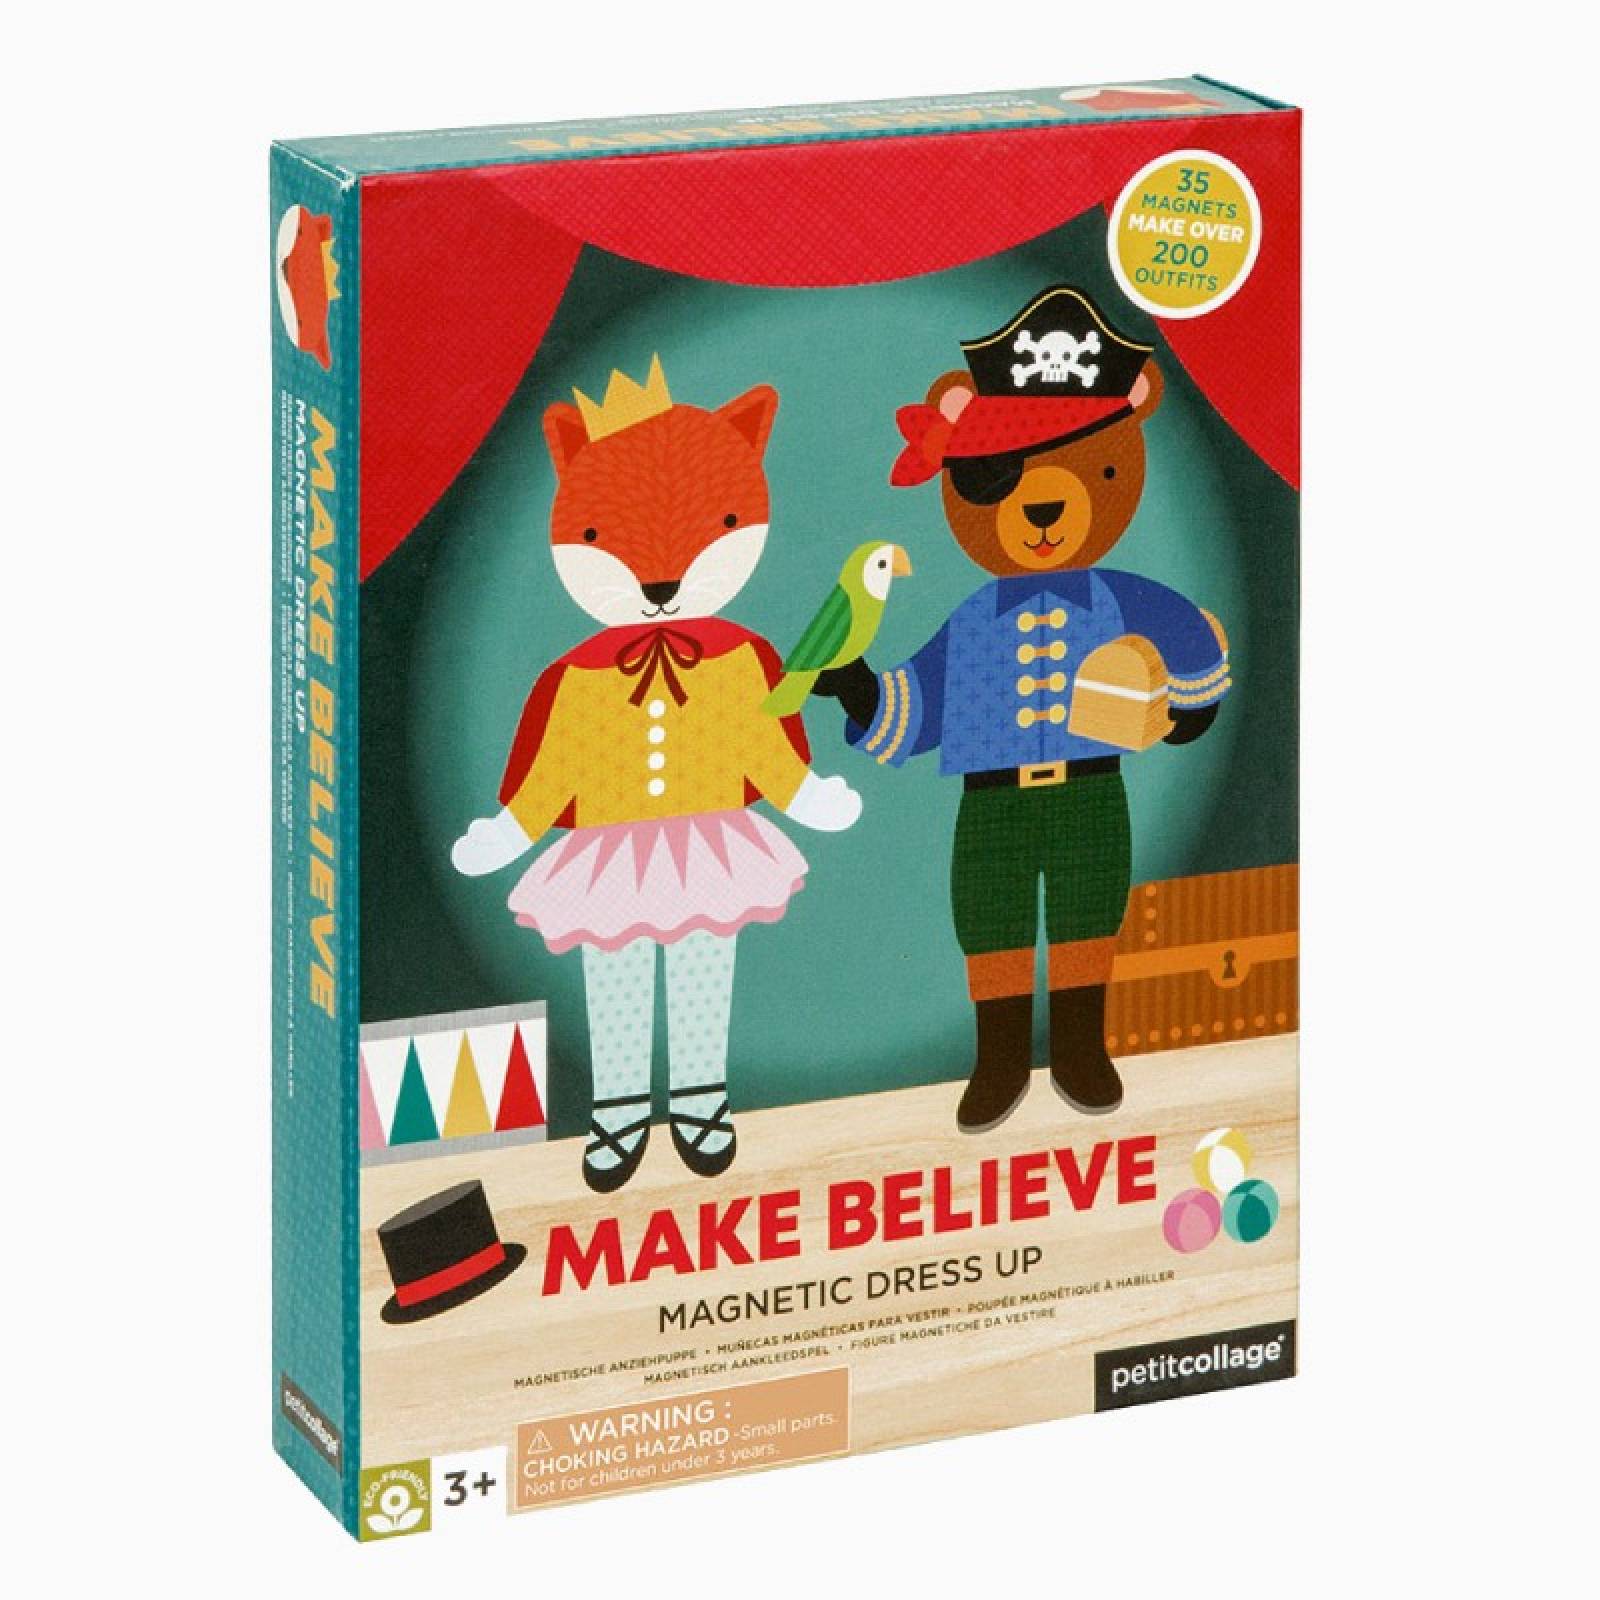 Make Believe - Magnetic Dress Up Play Set 3+